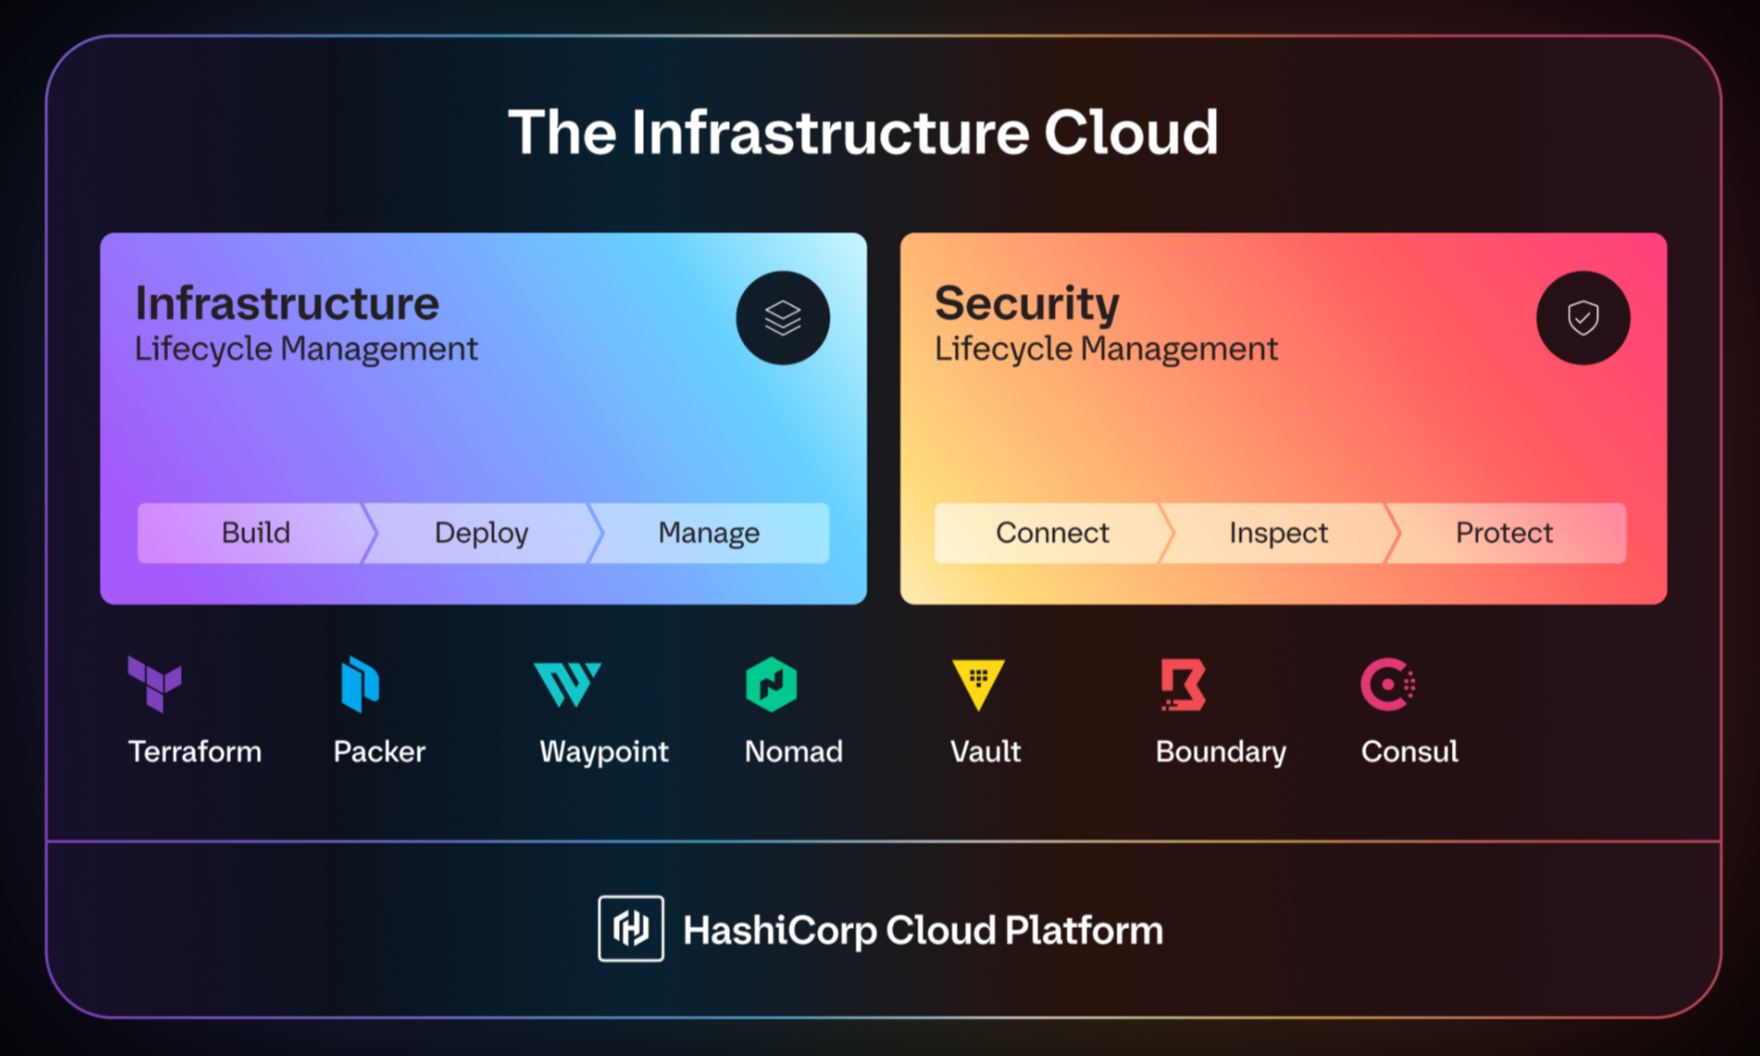 The Infrastructure Cloud on HCP